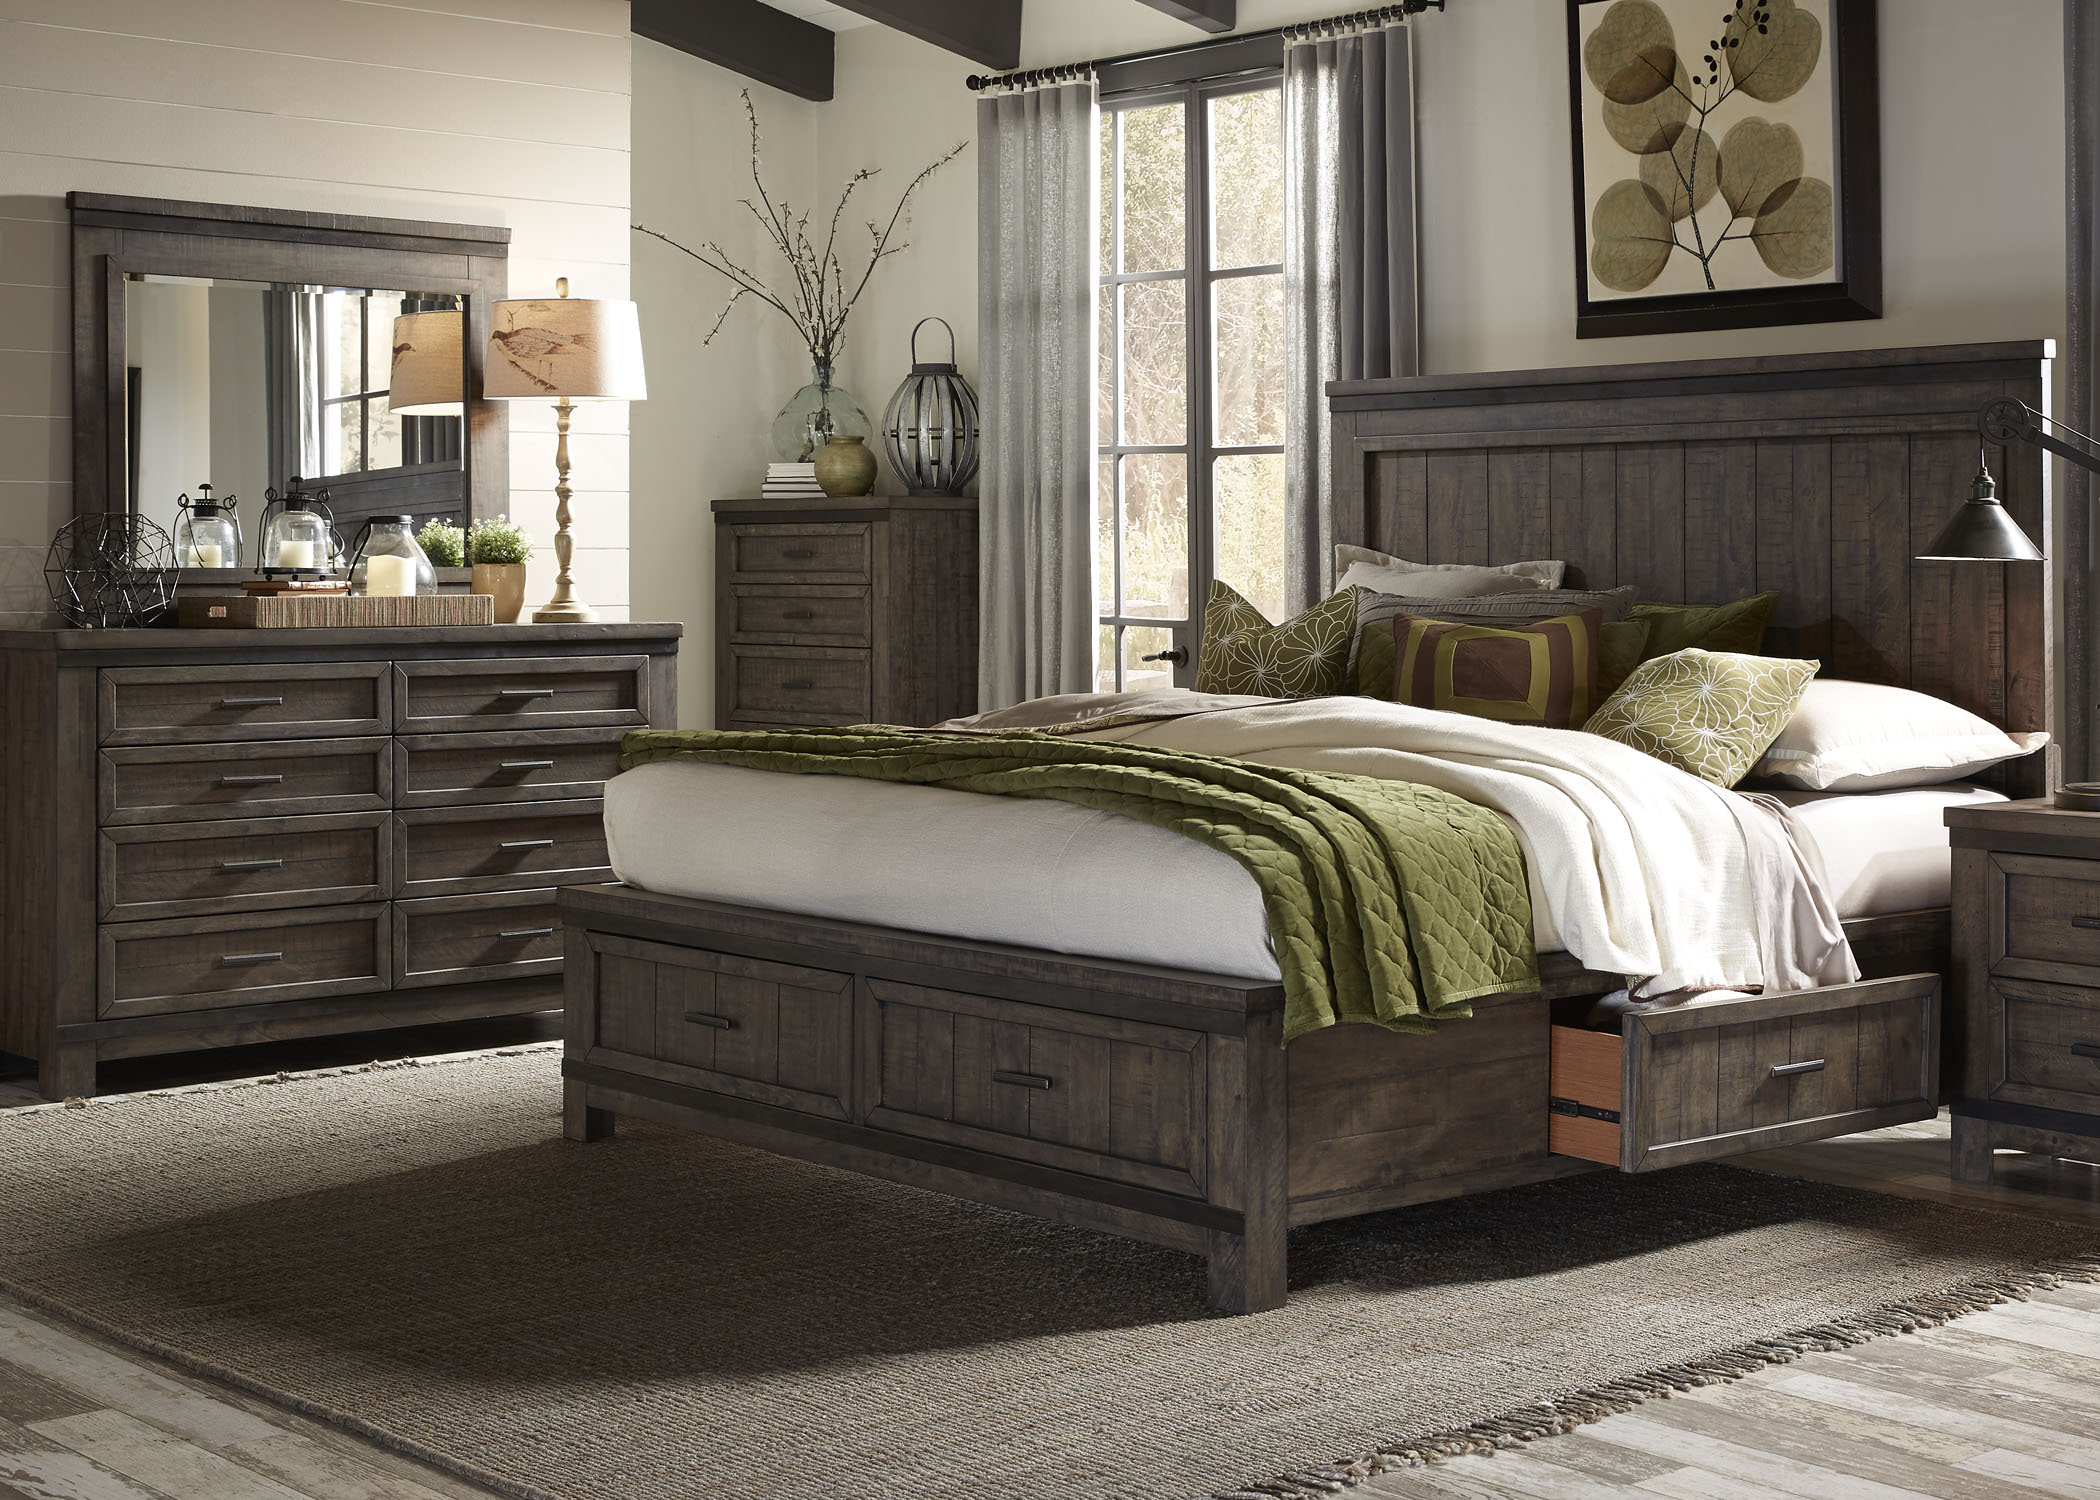 Liberty Furniture Thornwood Hills Bedroom King Two Sided Storage Bed, Dresser, and Mirror Collection